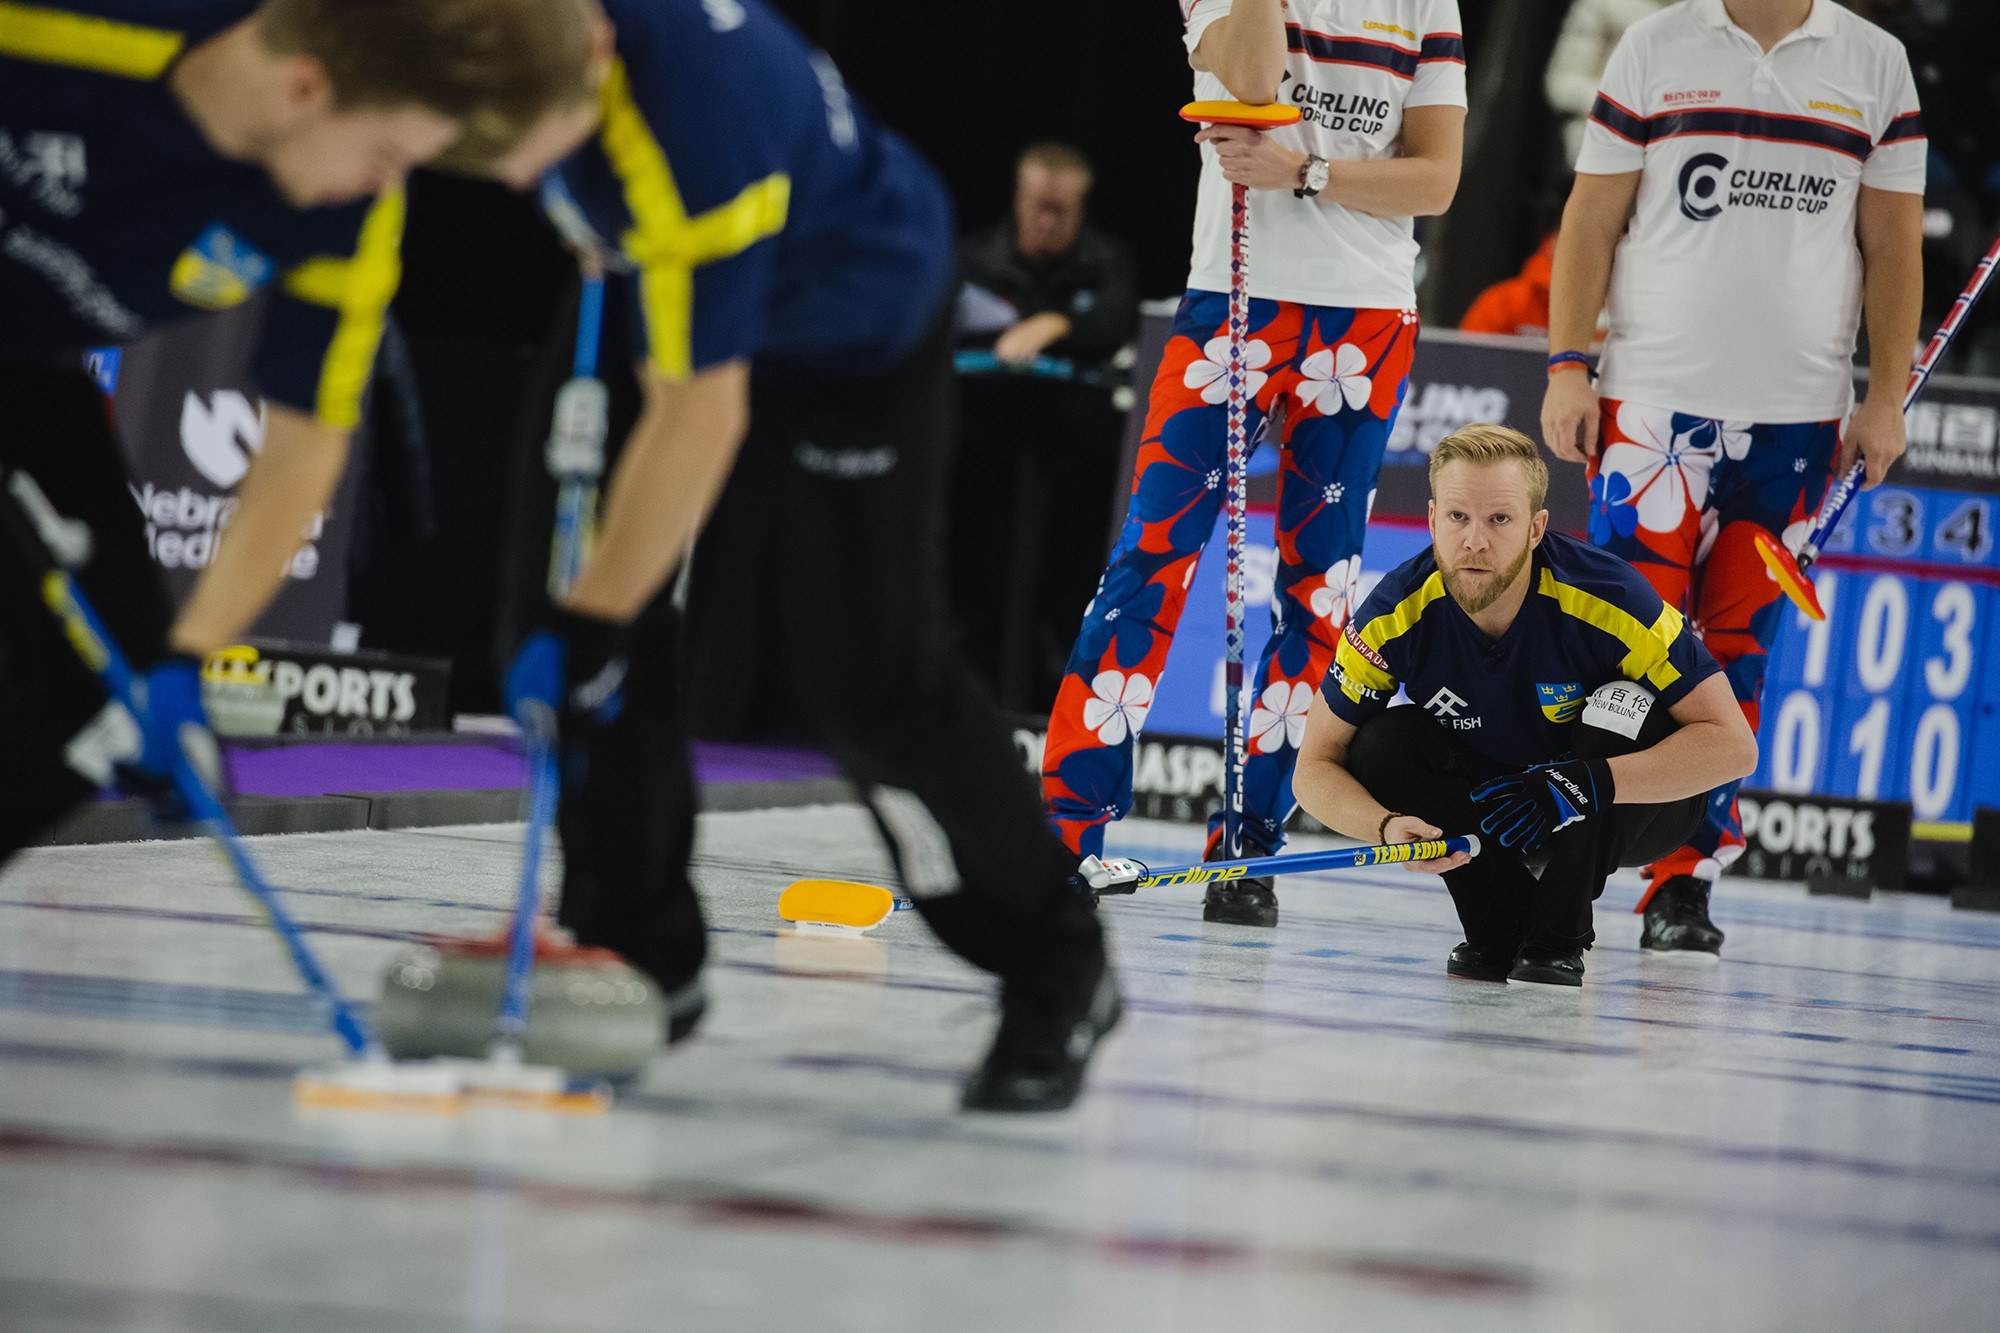 Sweden will play the United States at the Curling World Cup in what will be a rematch of the 2018 Pyeongchang Winter Olympic final ©WCF